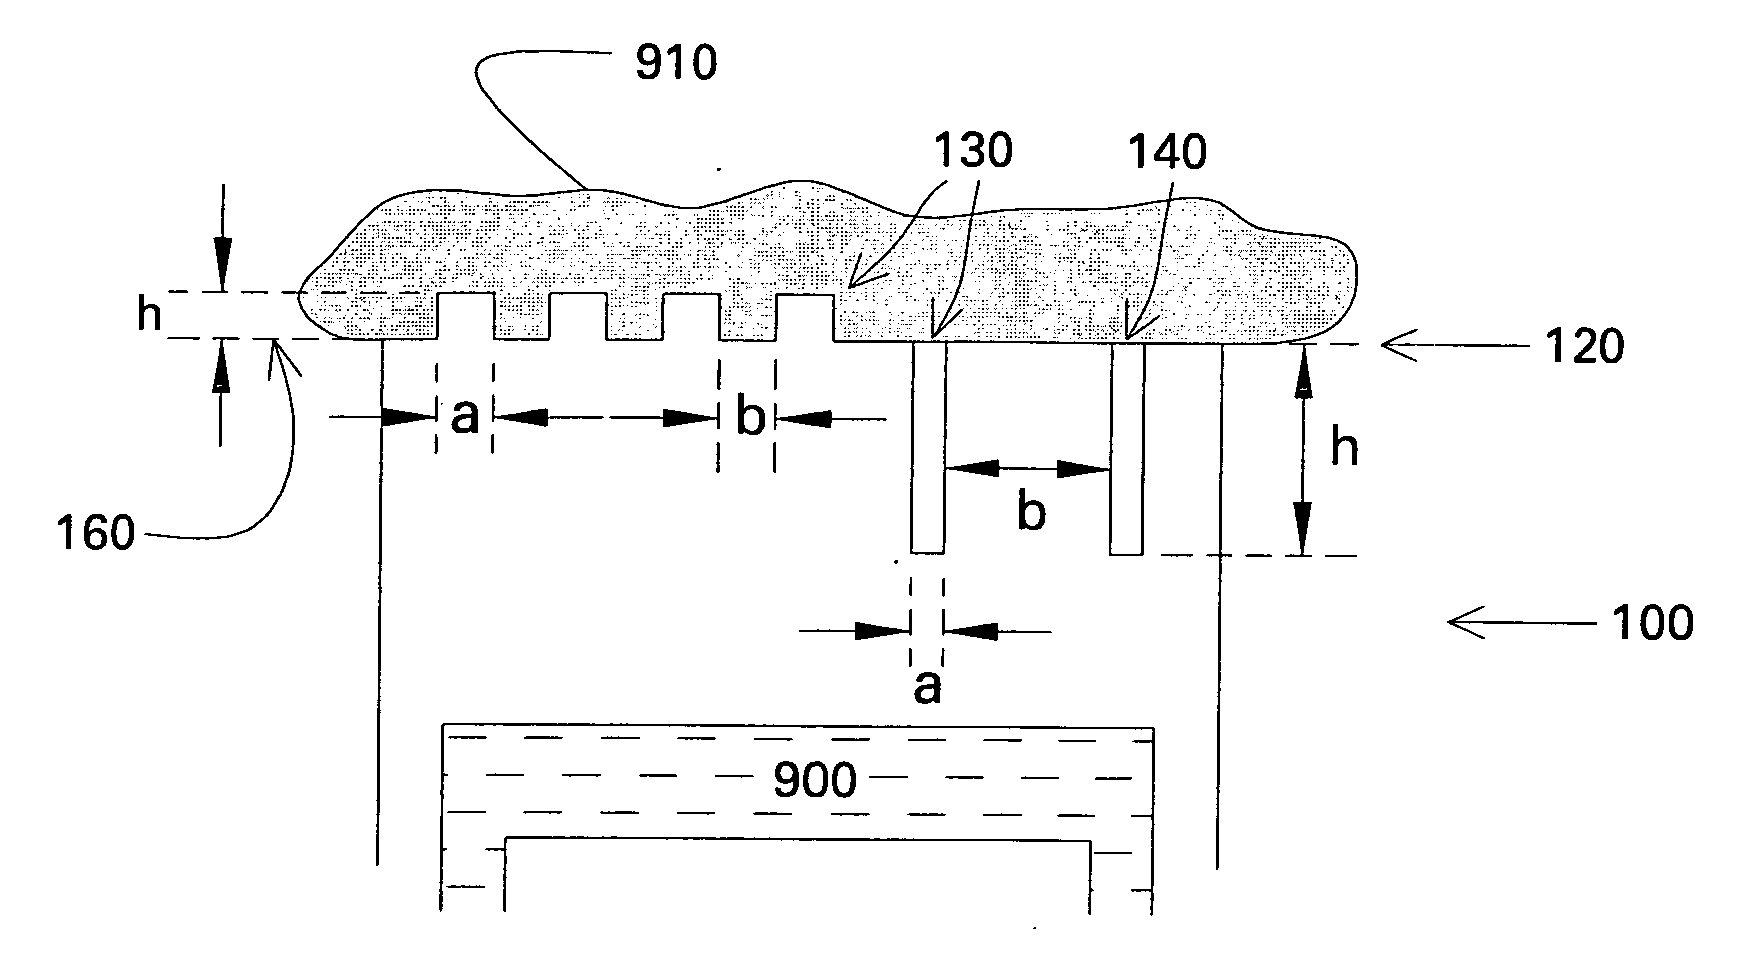 Heat transfer apparatus and systems including the apparatus